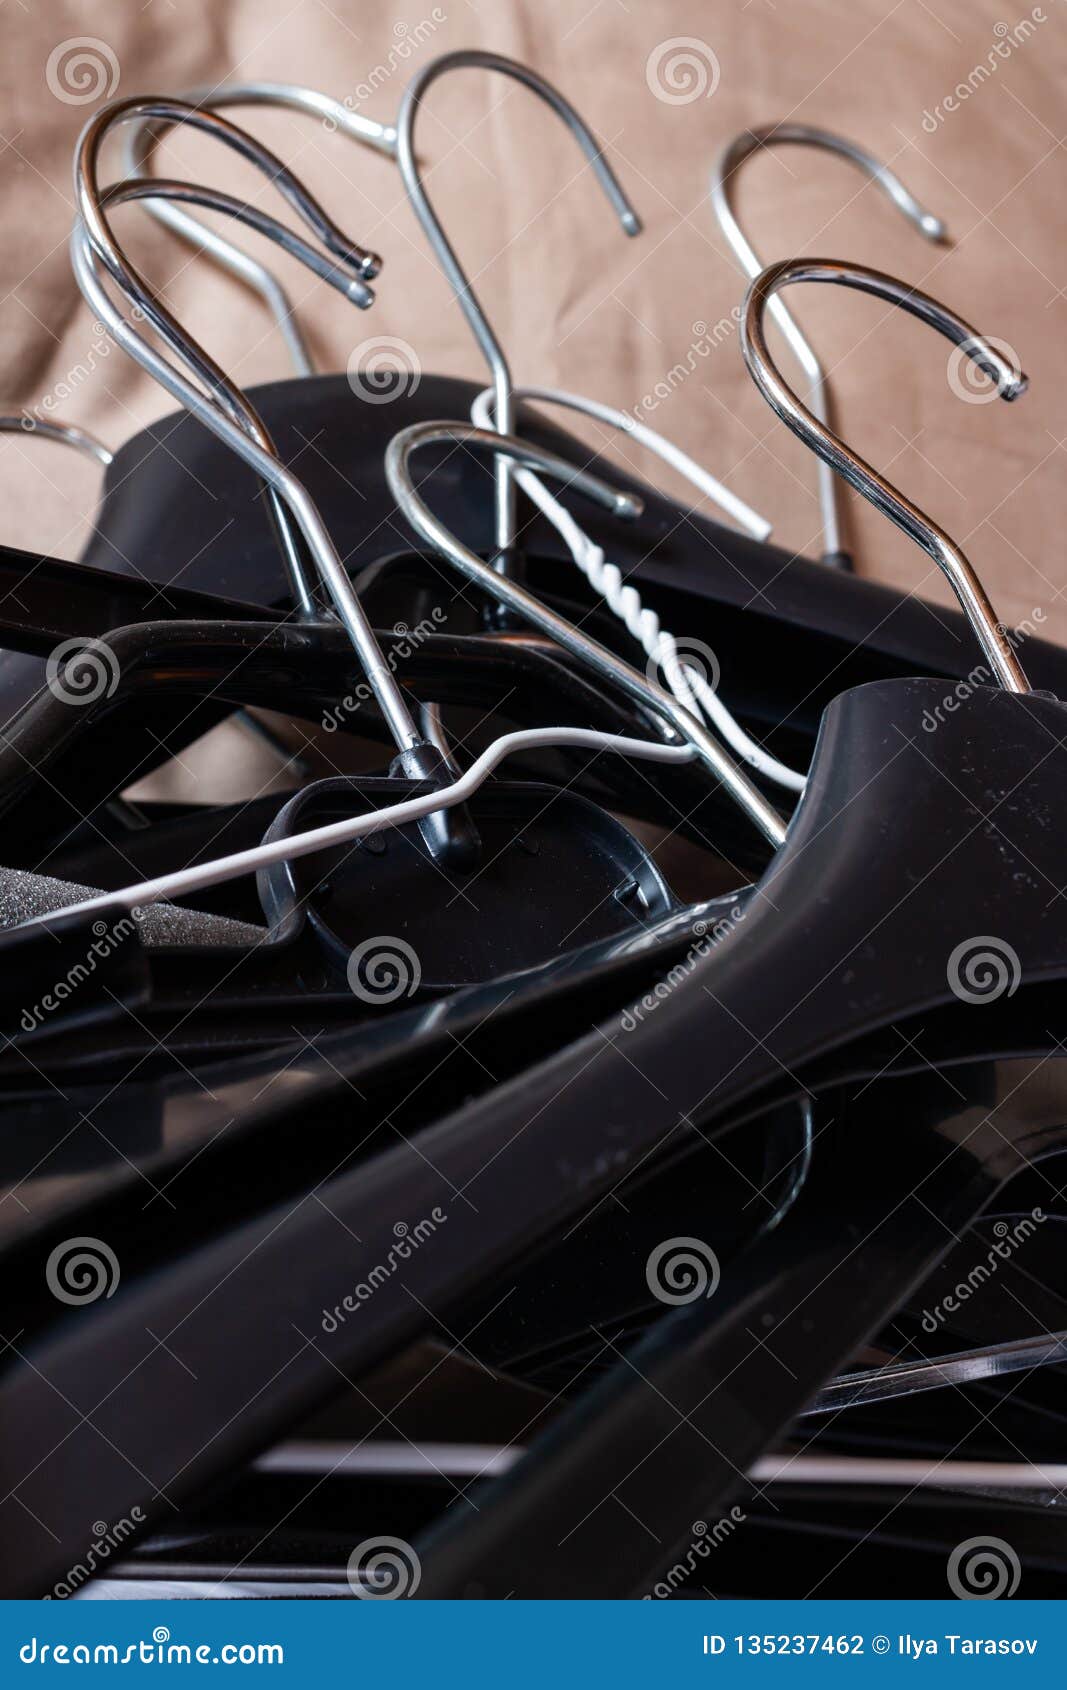 Clothes Hangers. Many Different Hangers for Clothes Stock Photo - Image ...